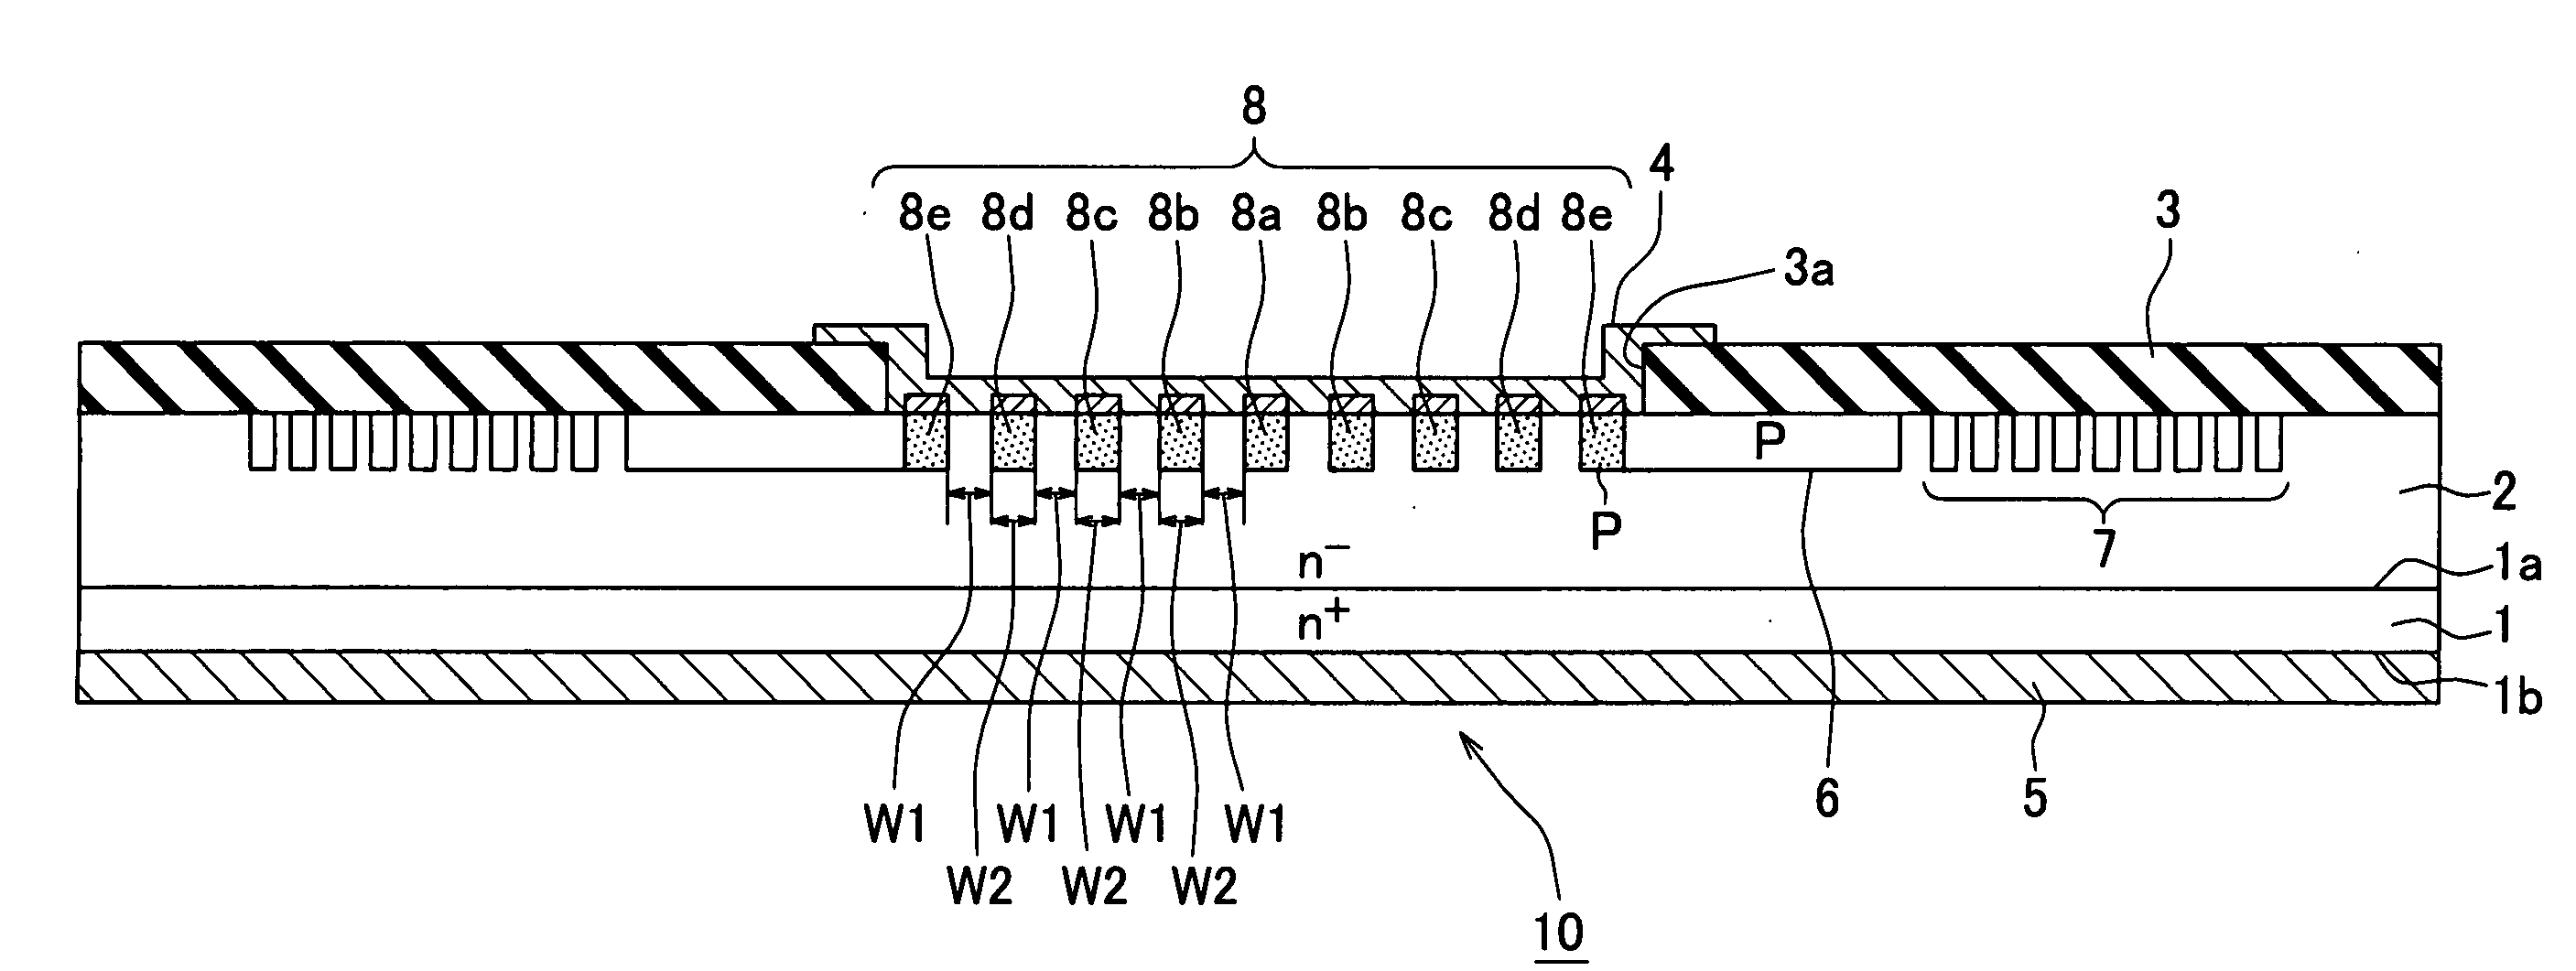 SIS semiconductor having junction barrier schottky device